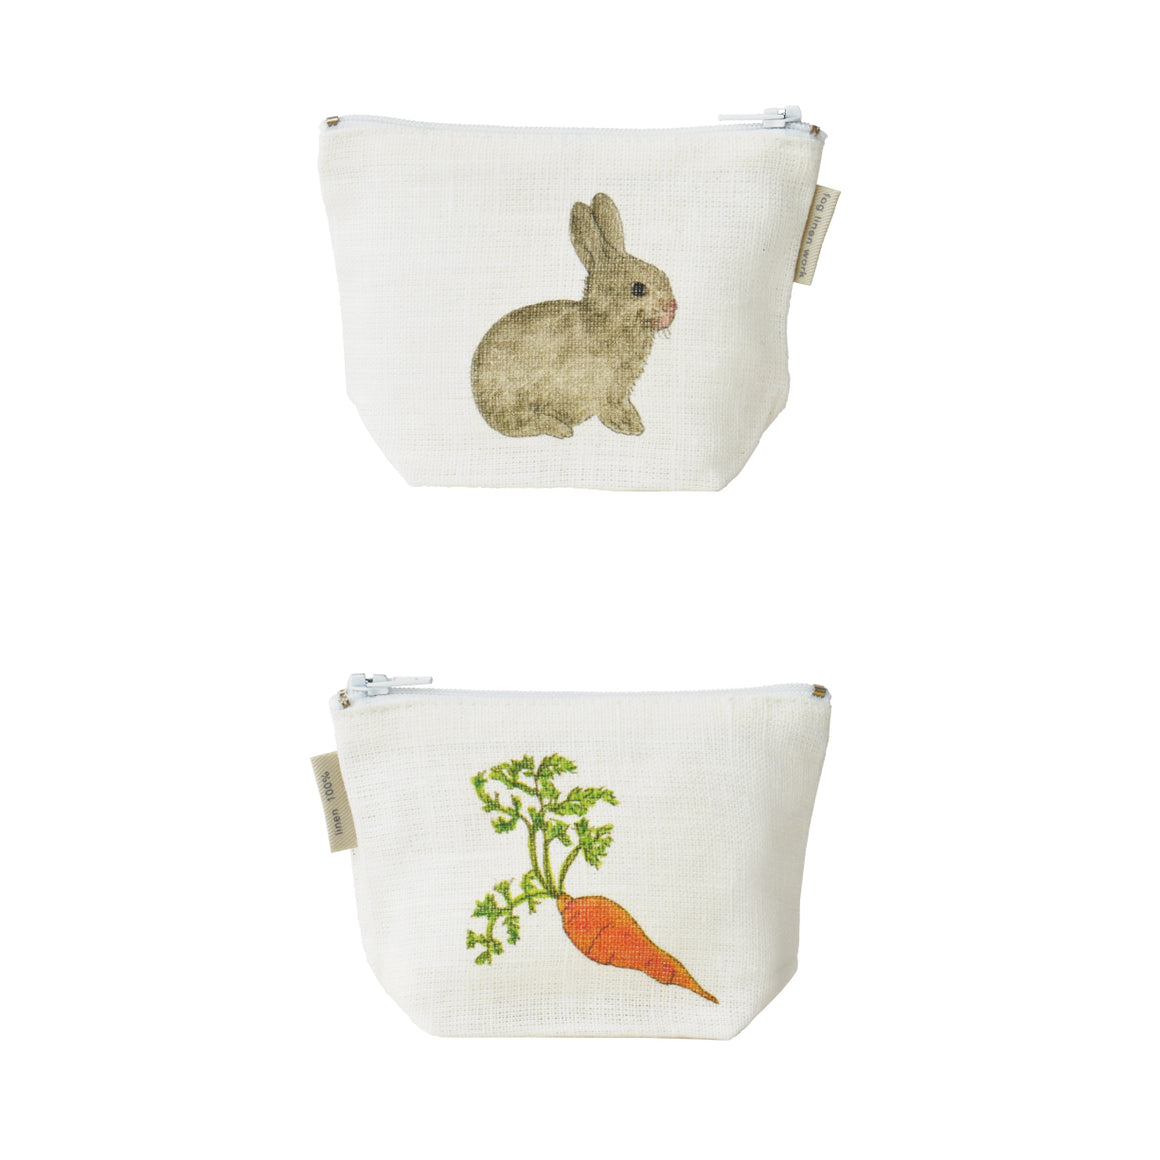 Bunny + Carrots Pouch